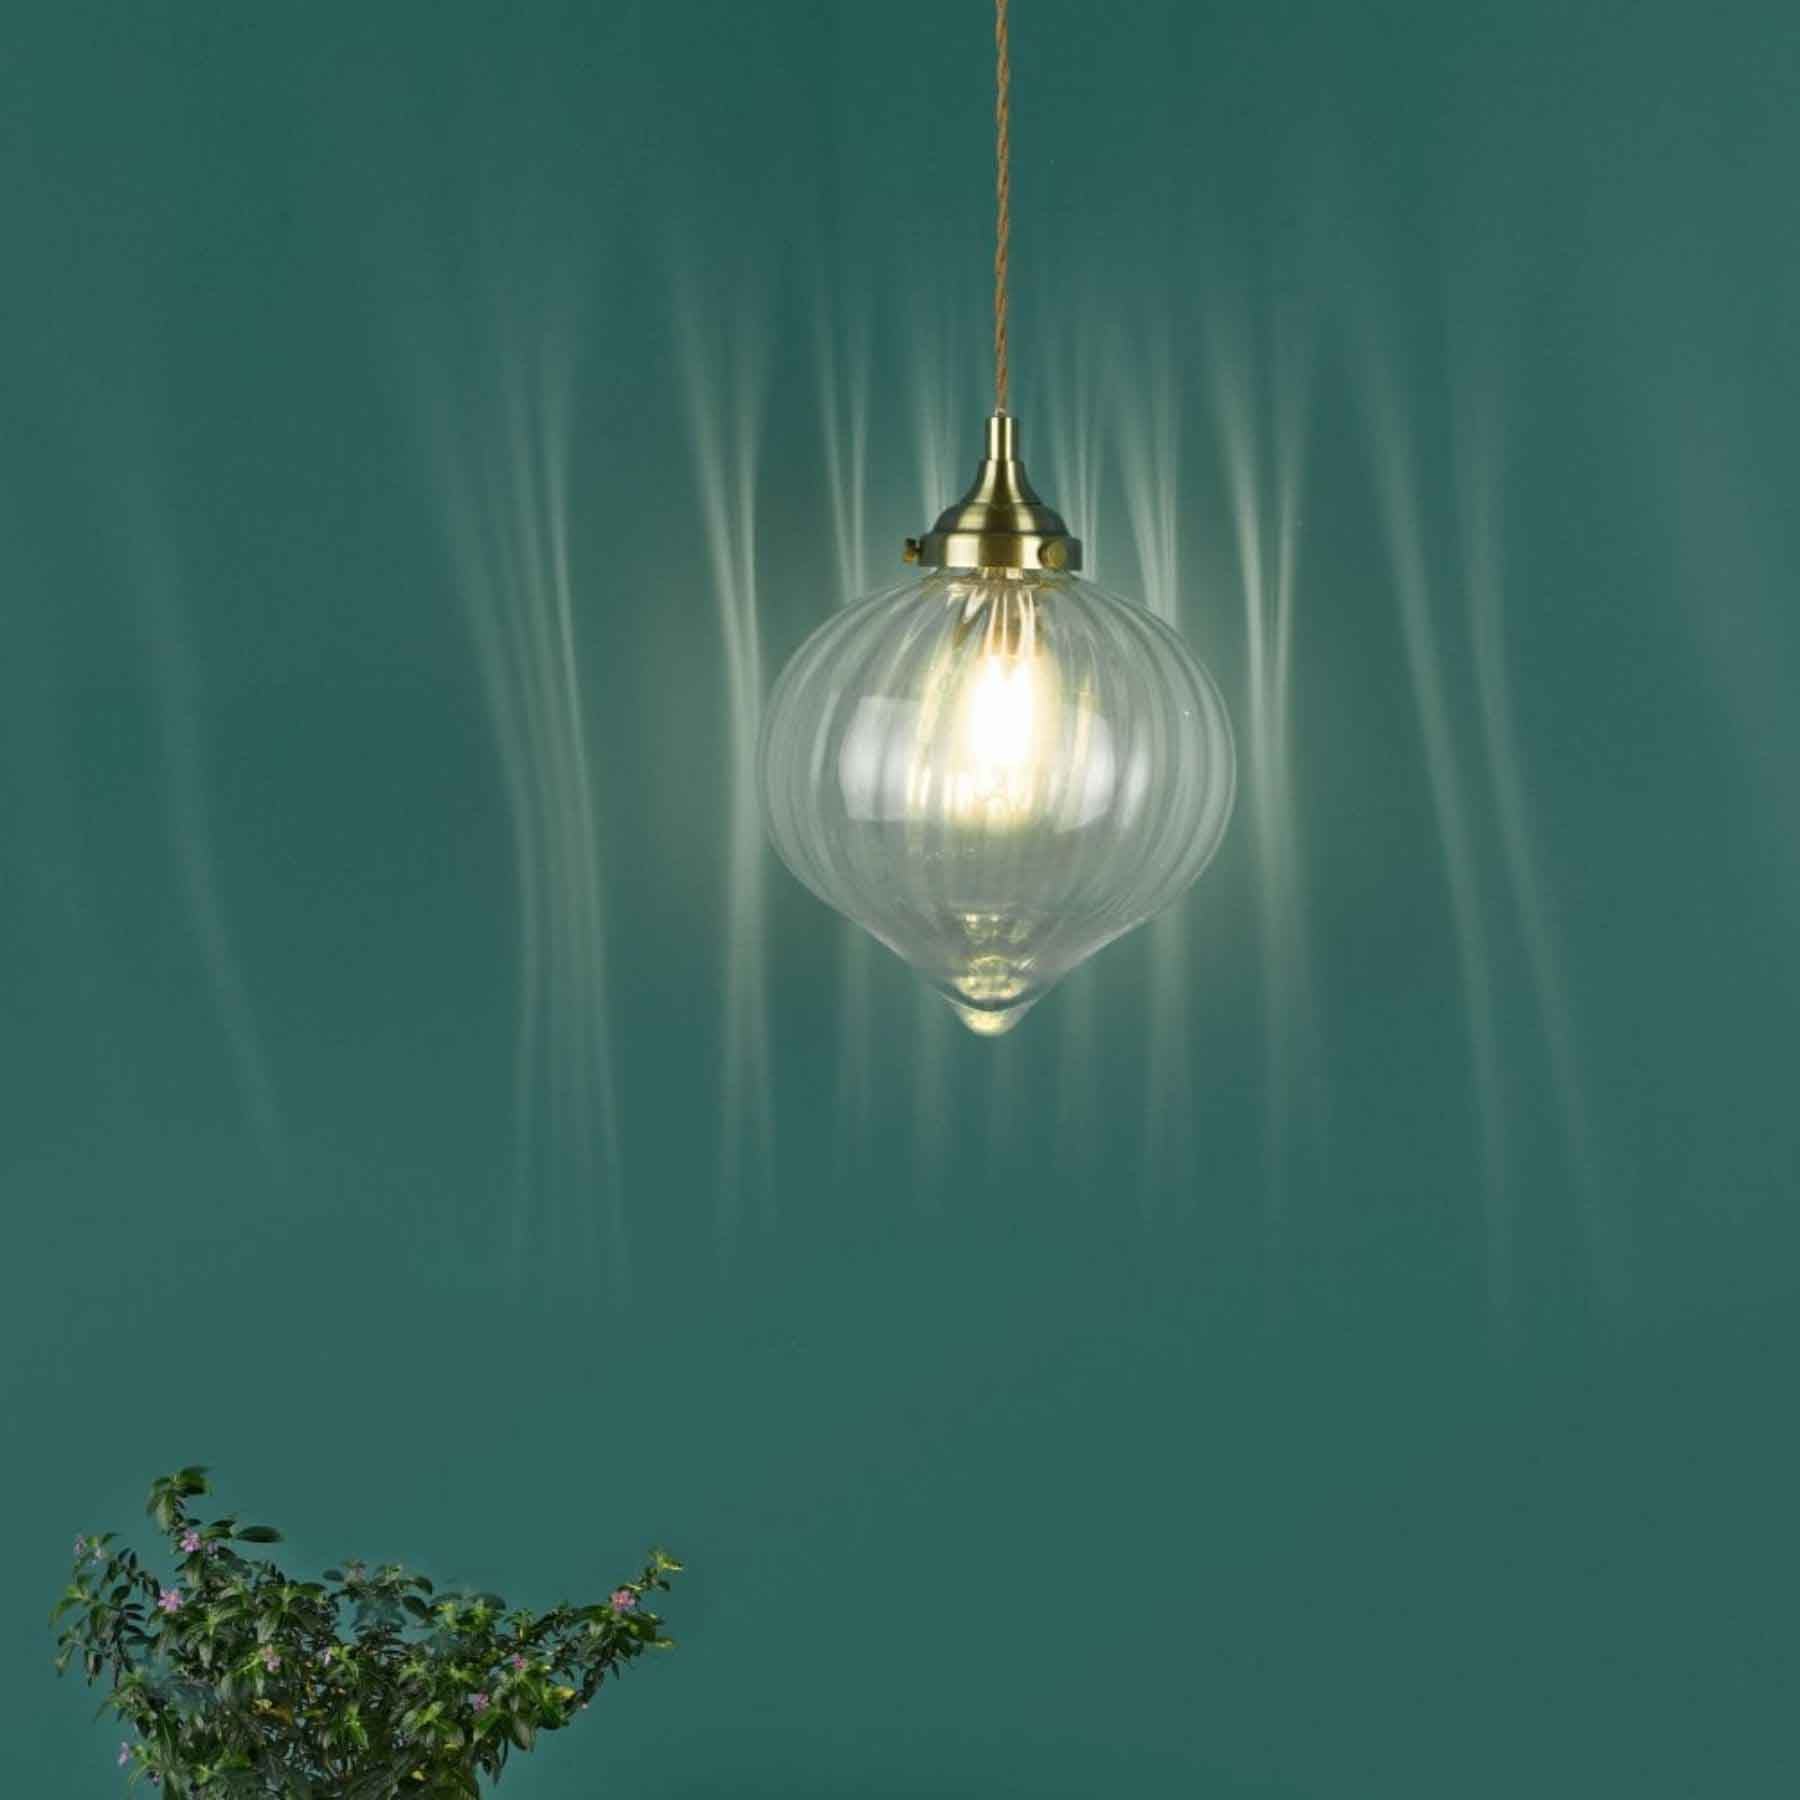 enhanced by antique brass metalwork the mya was initially envisioned as a kitchen pendant light